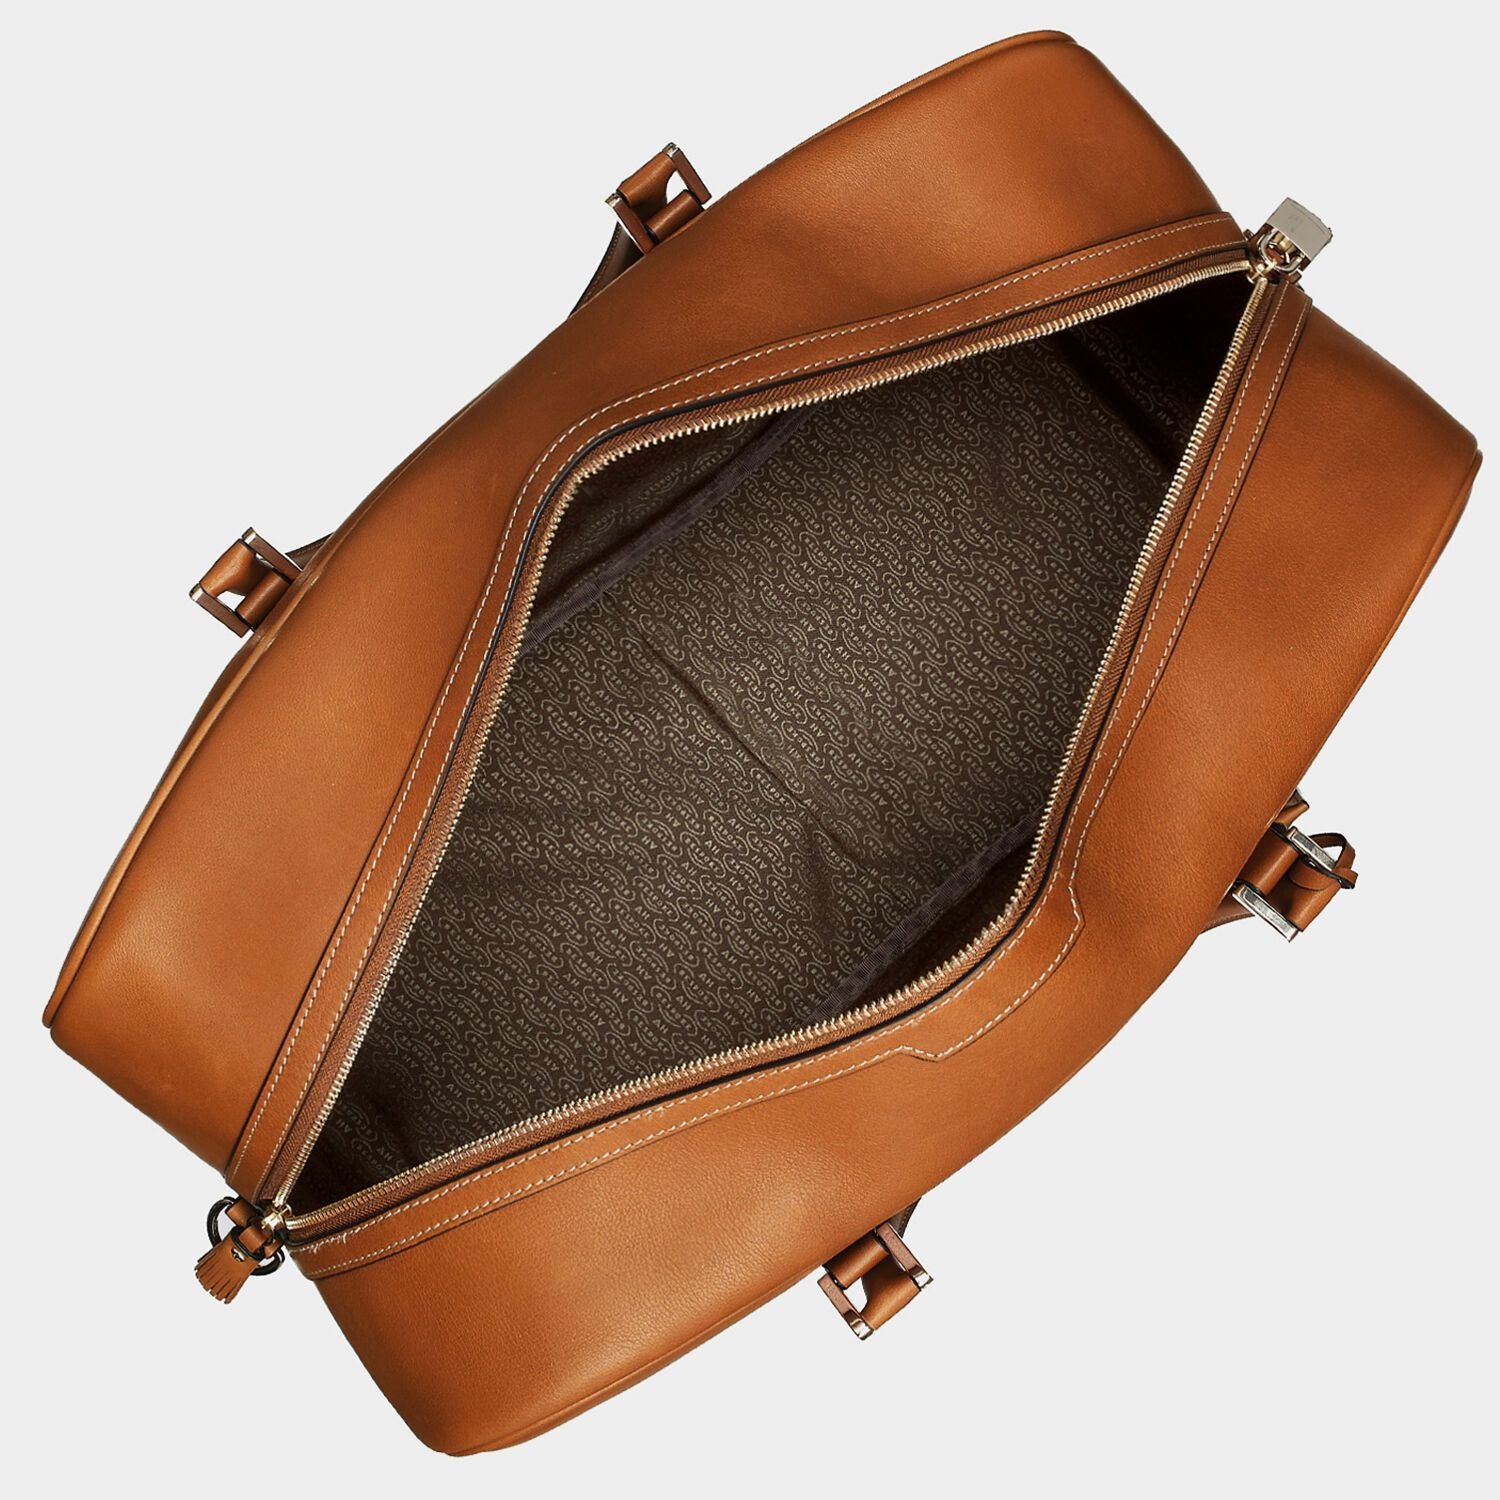 Bespoke Latimer Weekend Bag -

                  
                    Butter Leather in Tan -
                  

                  Anya Hindmarch US
